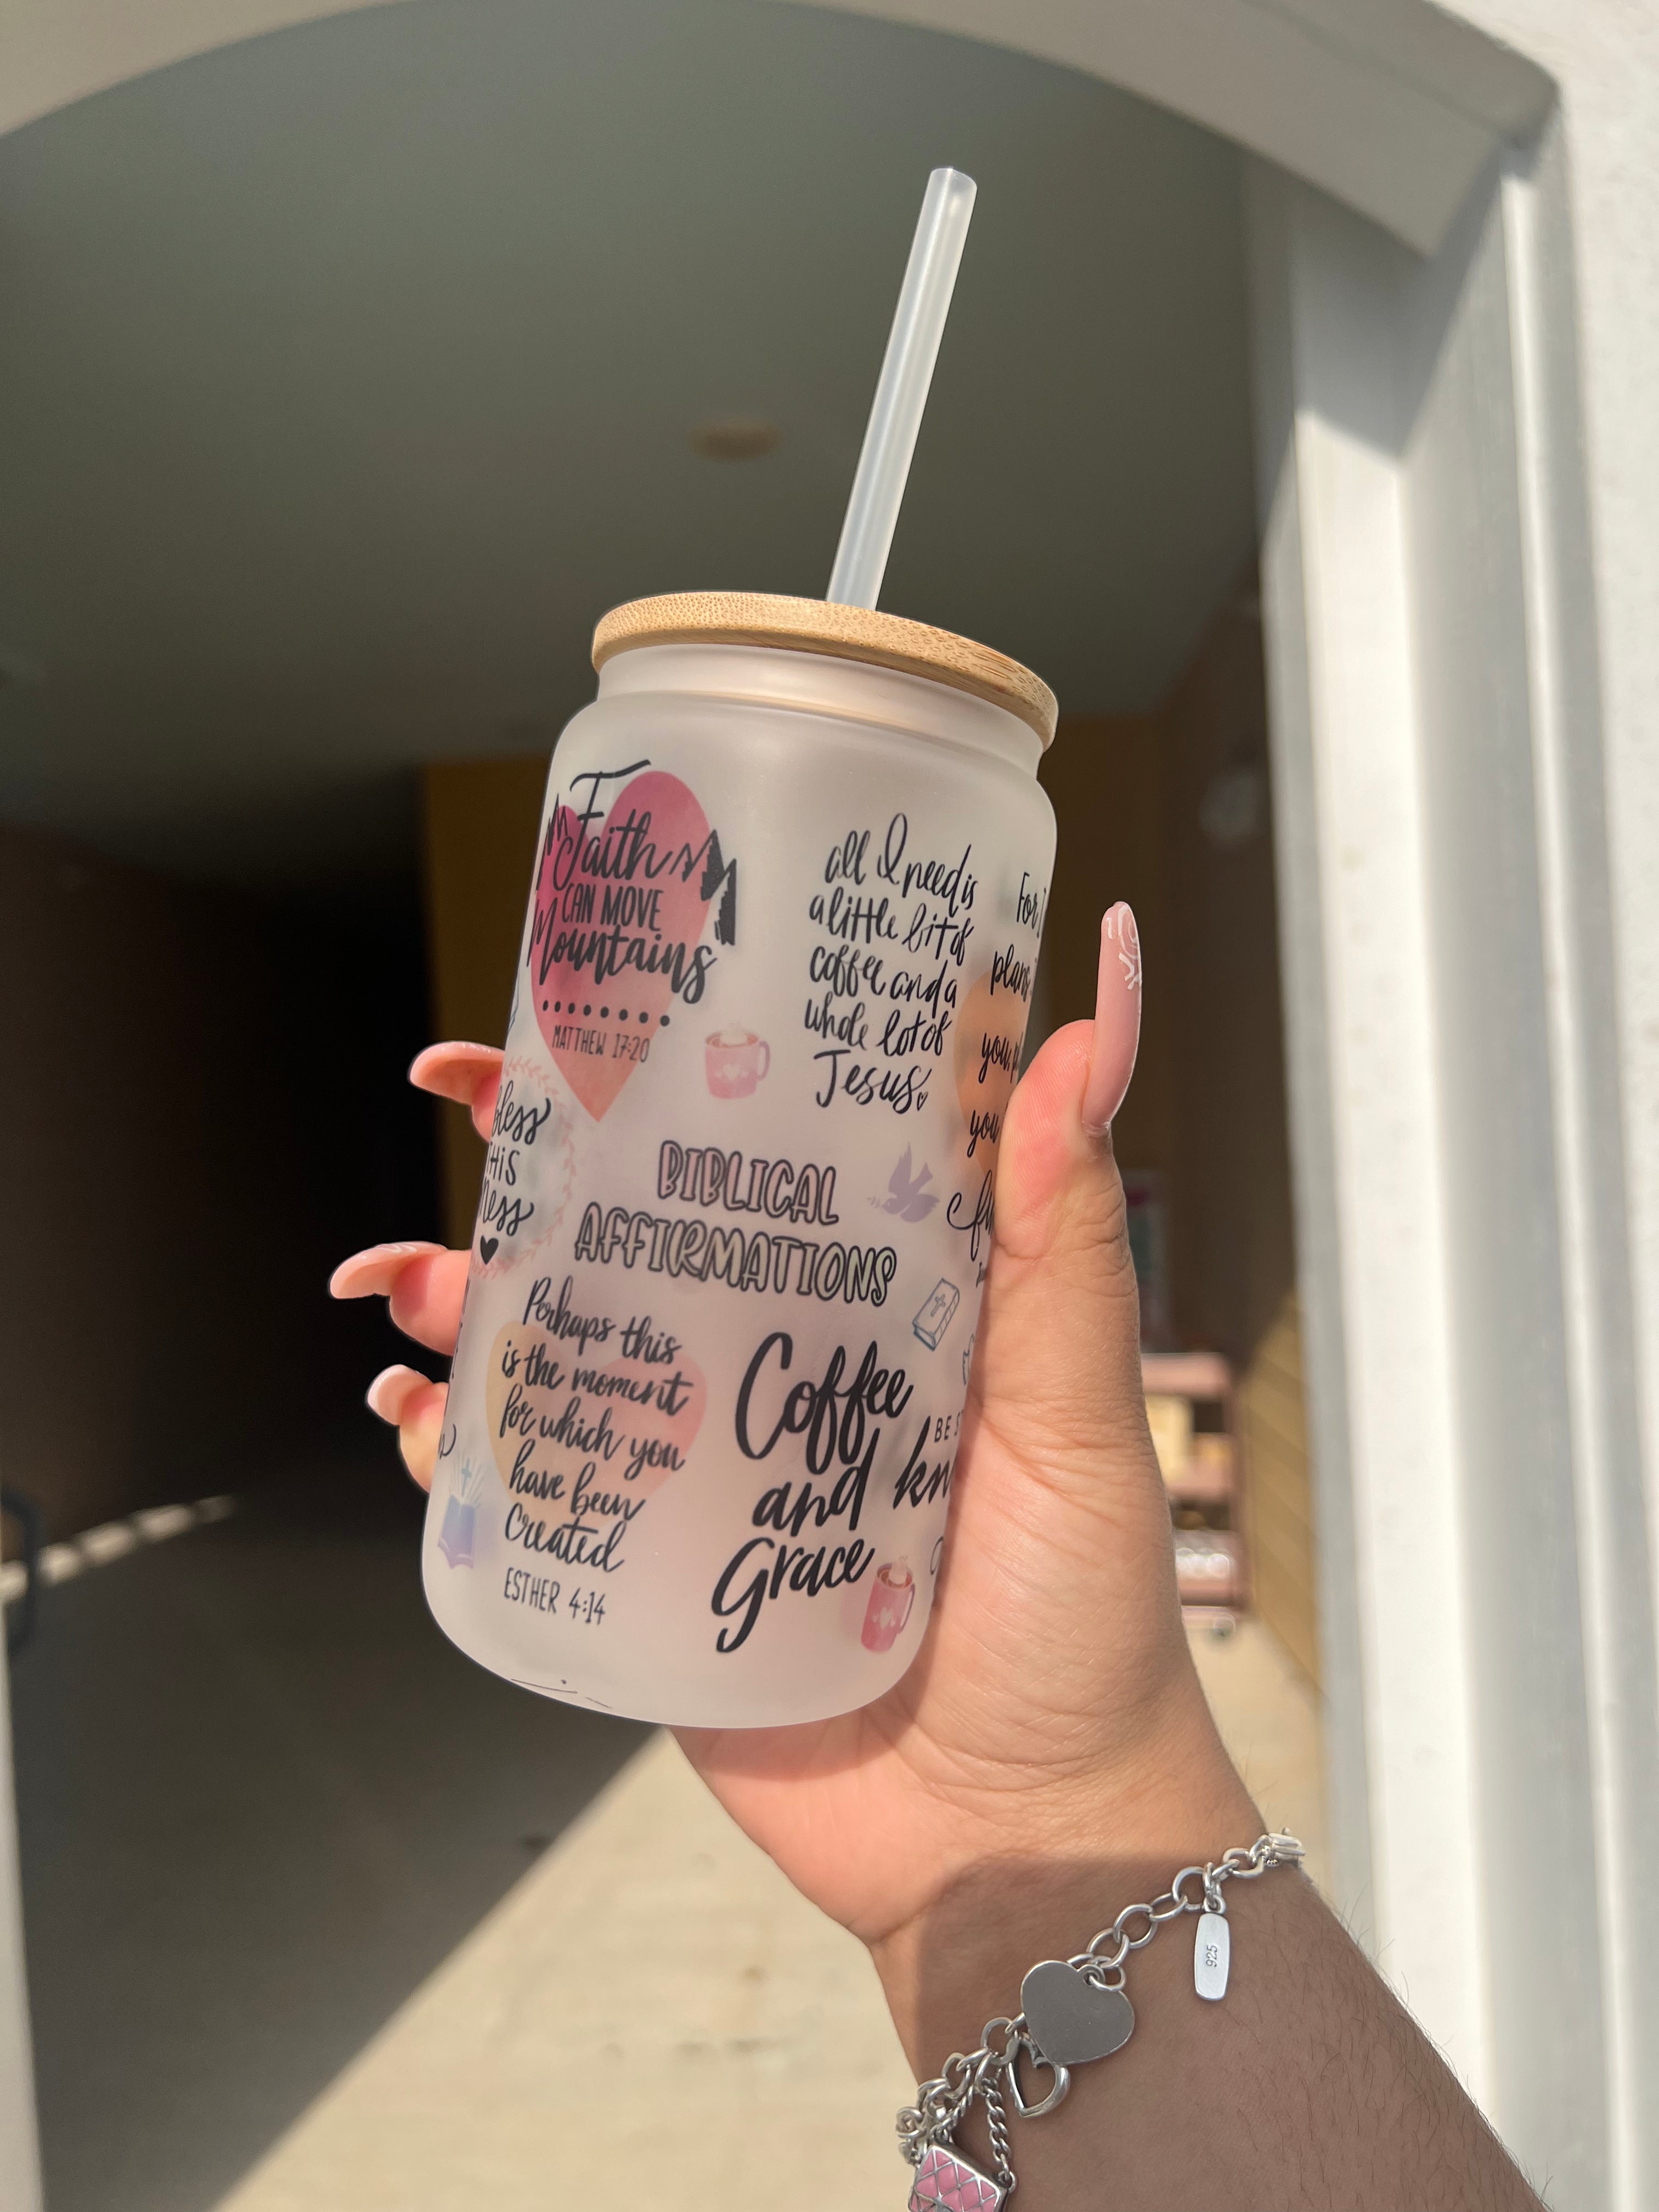 Biblical Affirmations frosted cup